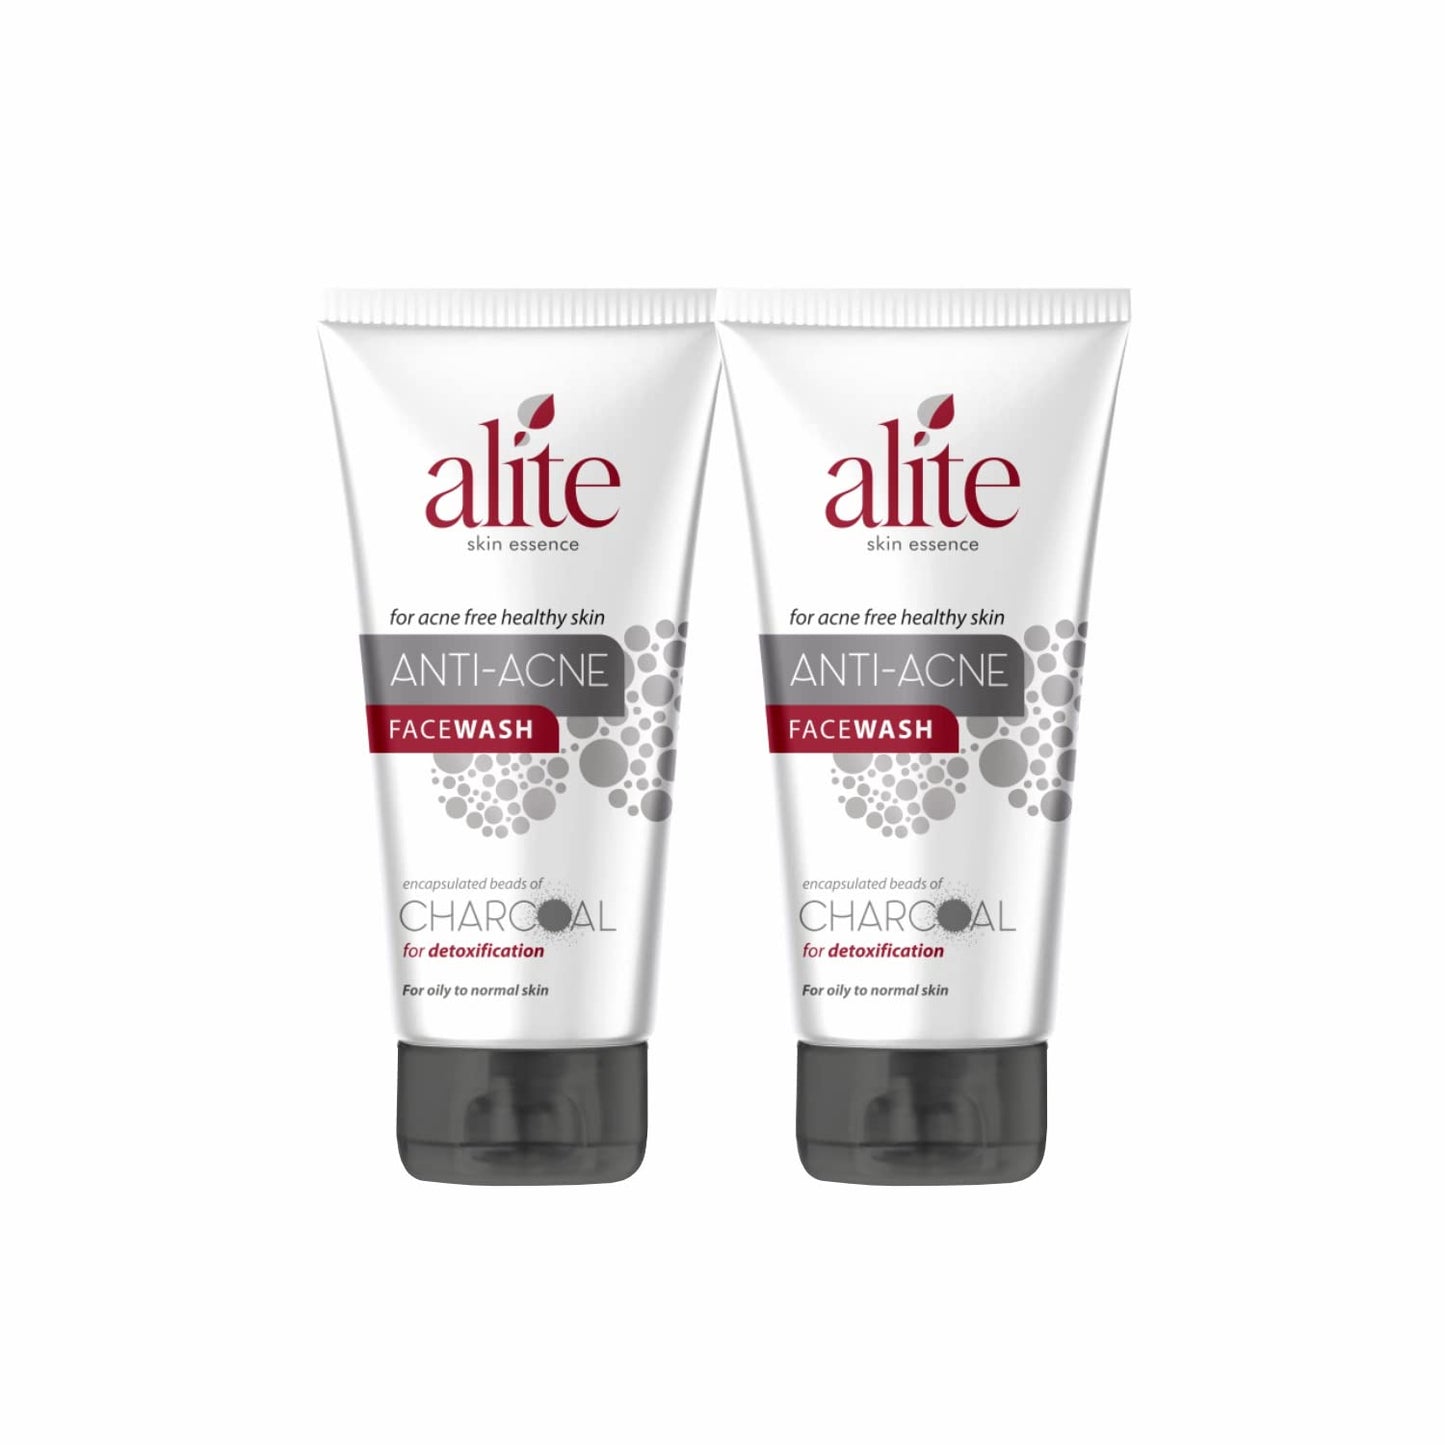 Alite Anti-Acne Face Wash for Oily to Normal Skin with Encapsulated beads of Charcoal to Detoxifying Skin (each 70gm) - Pack of 2